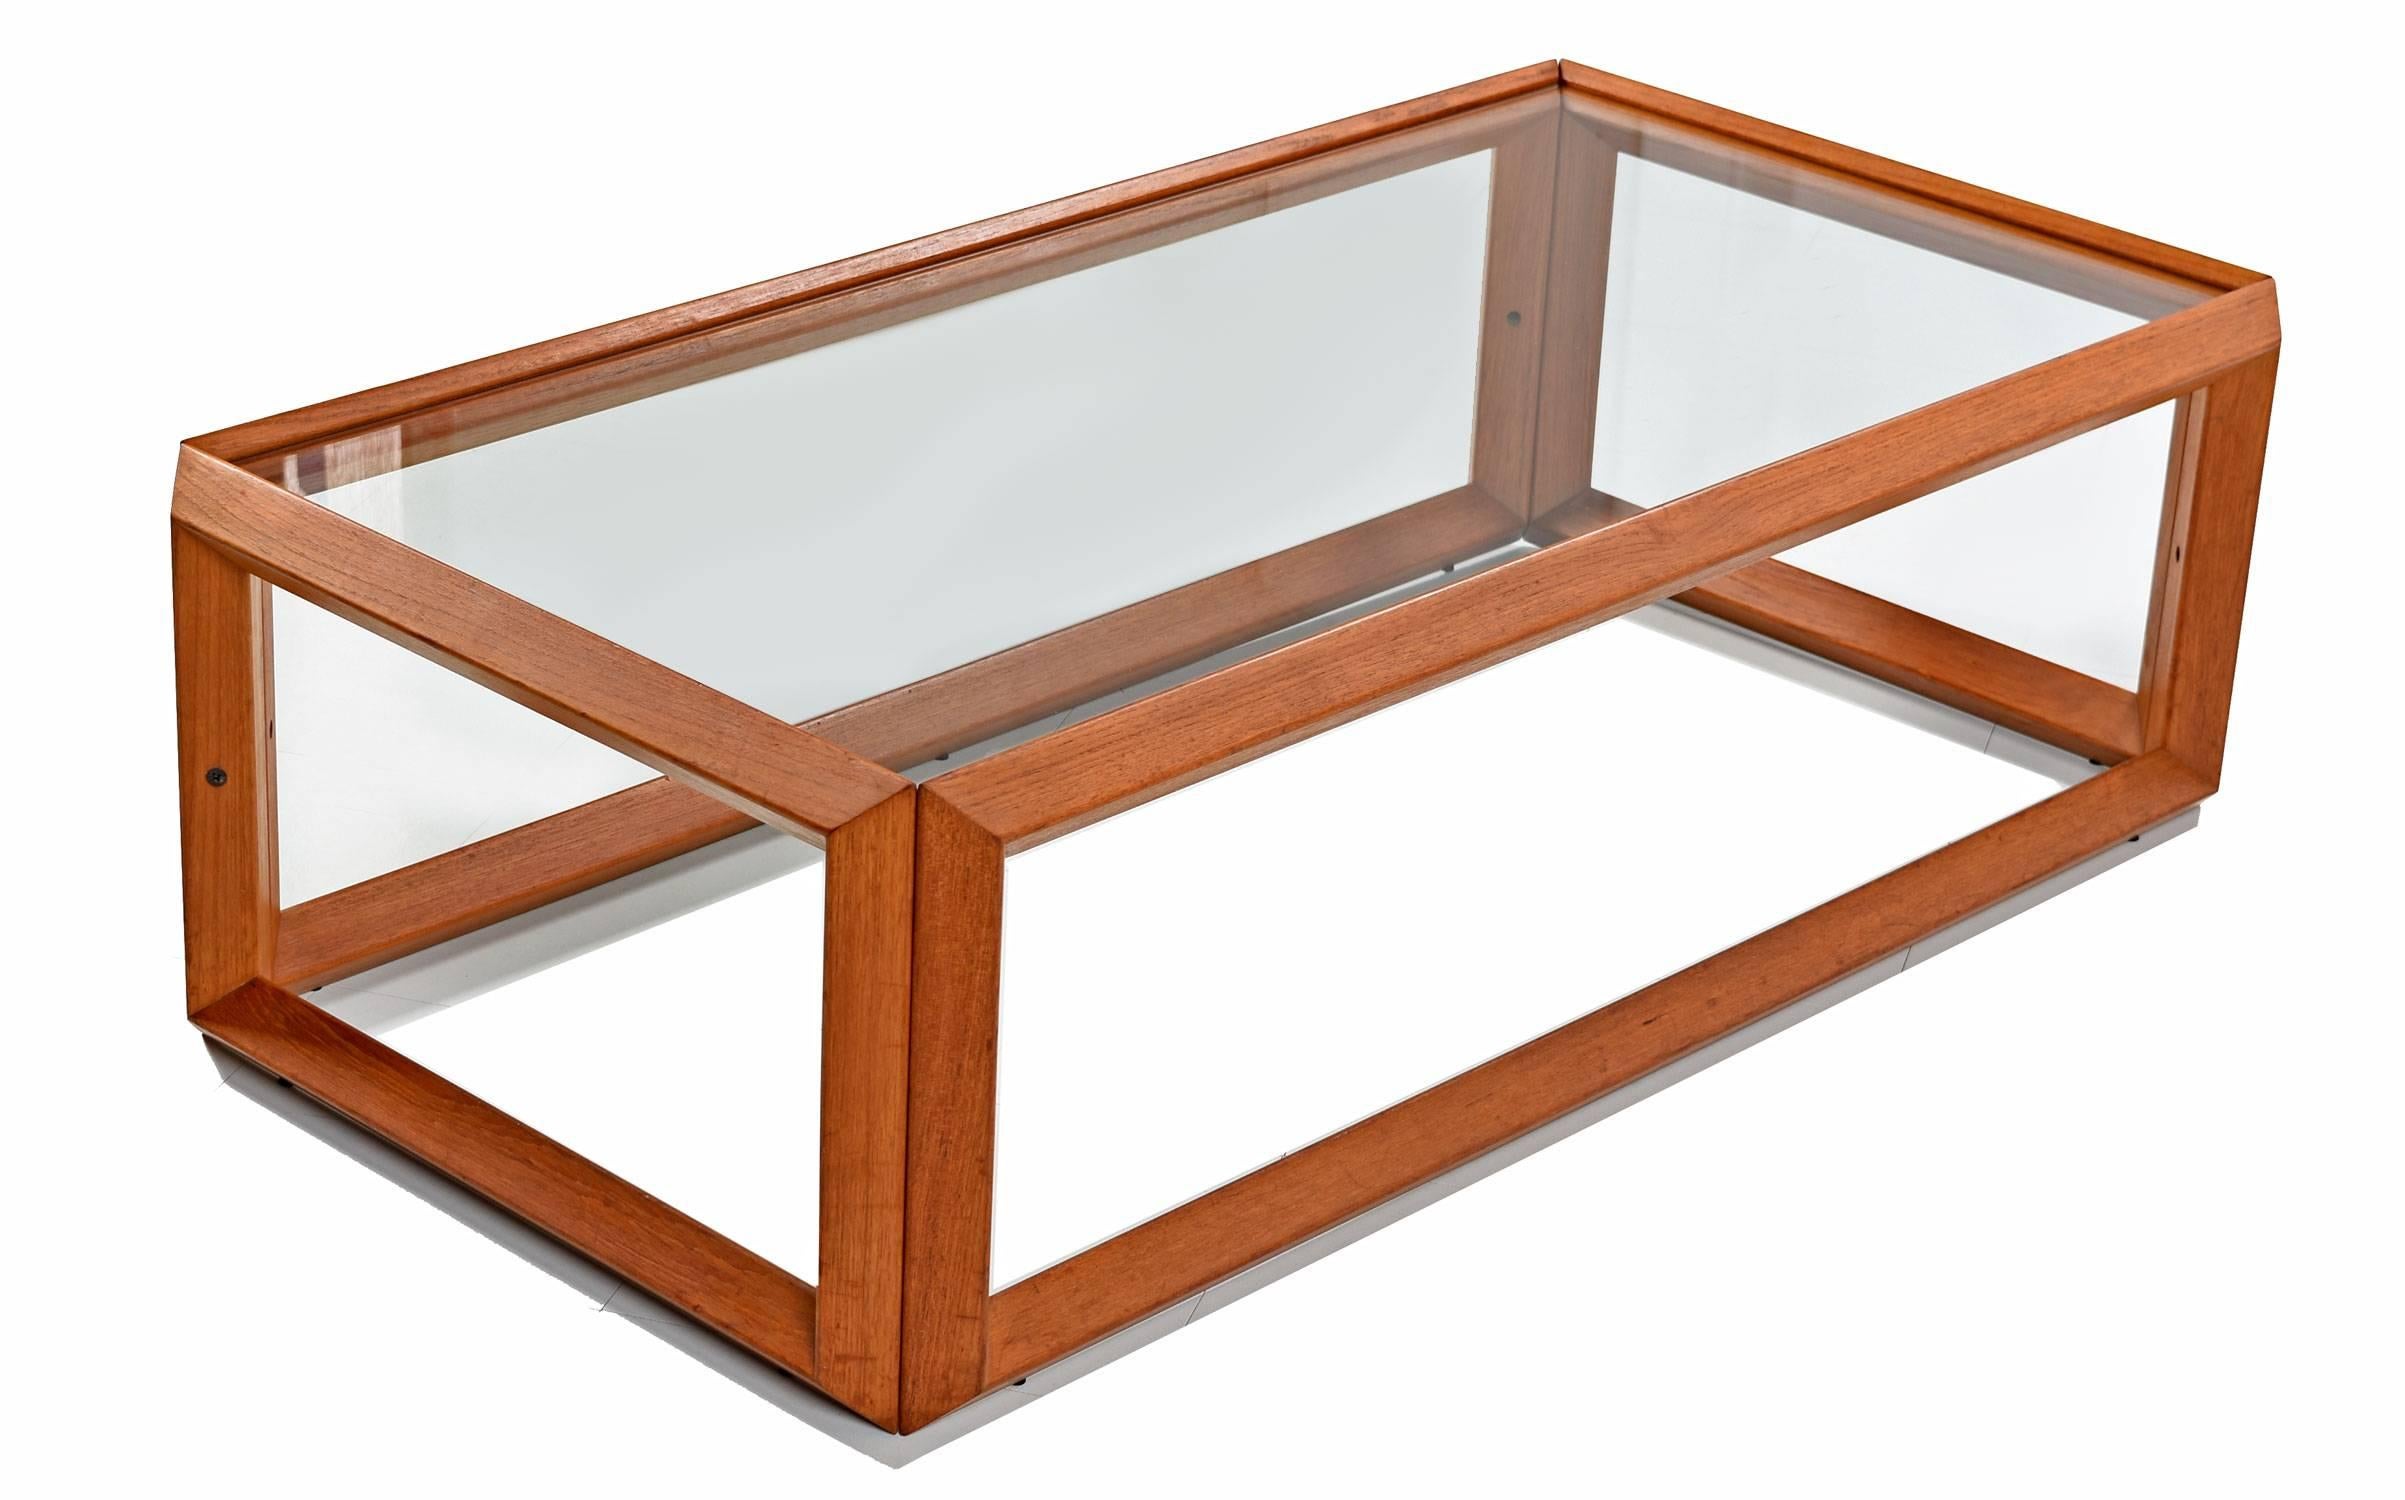 Vintage Danish modern style coffee table and (two) side tables made of solid teak and glass. All with open style teak frames allowing one to see through the form. A single pane of glass rests within the top layer of the frame to create a table